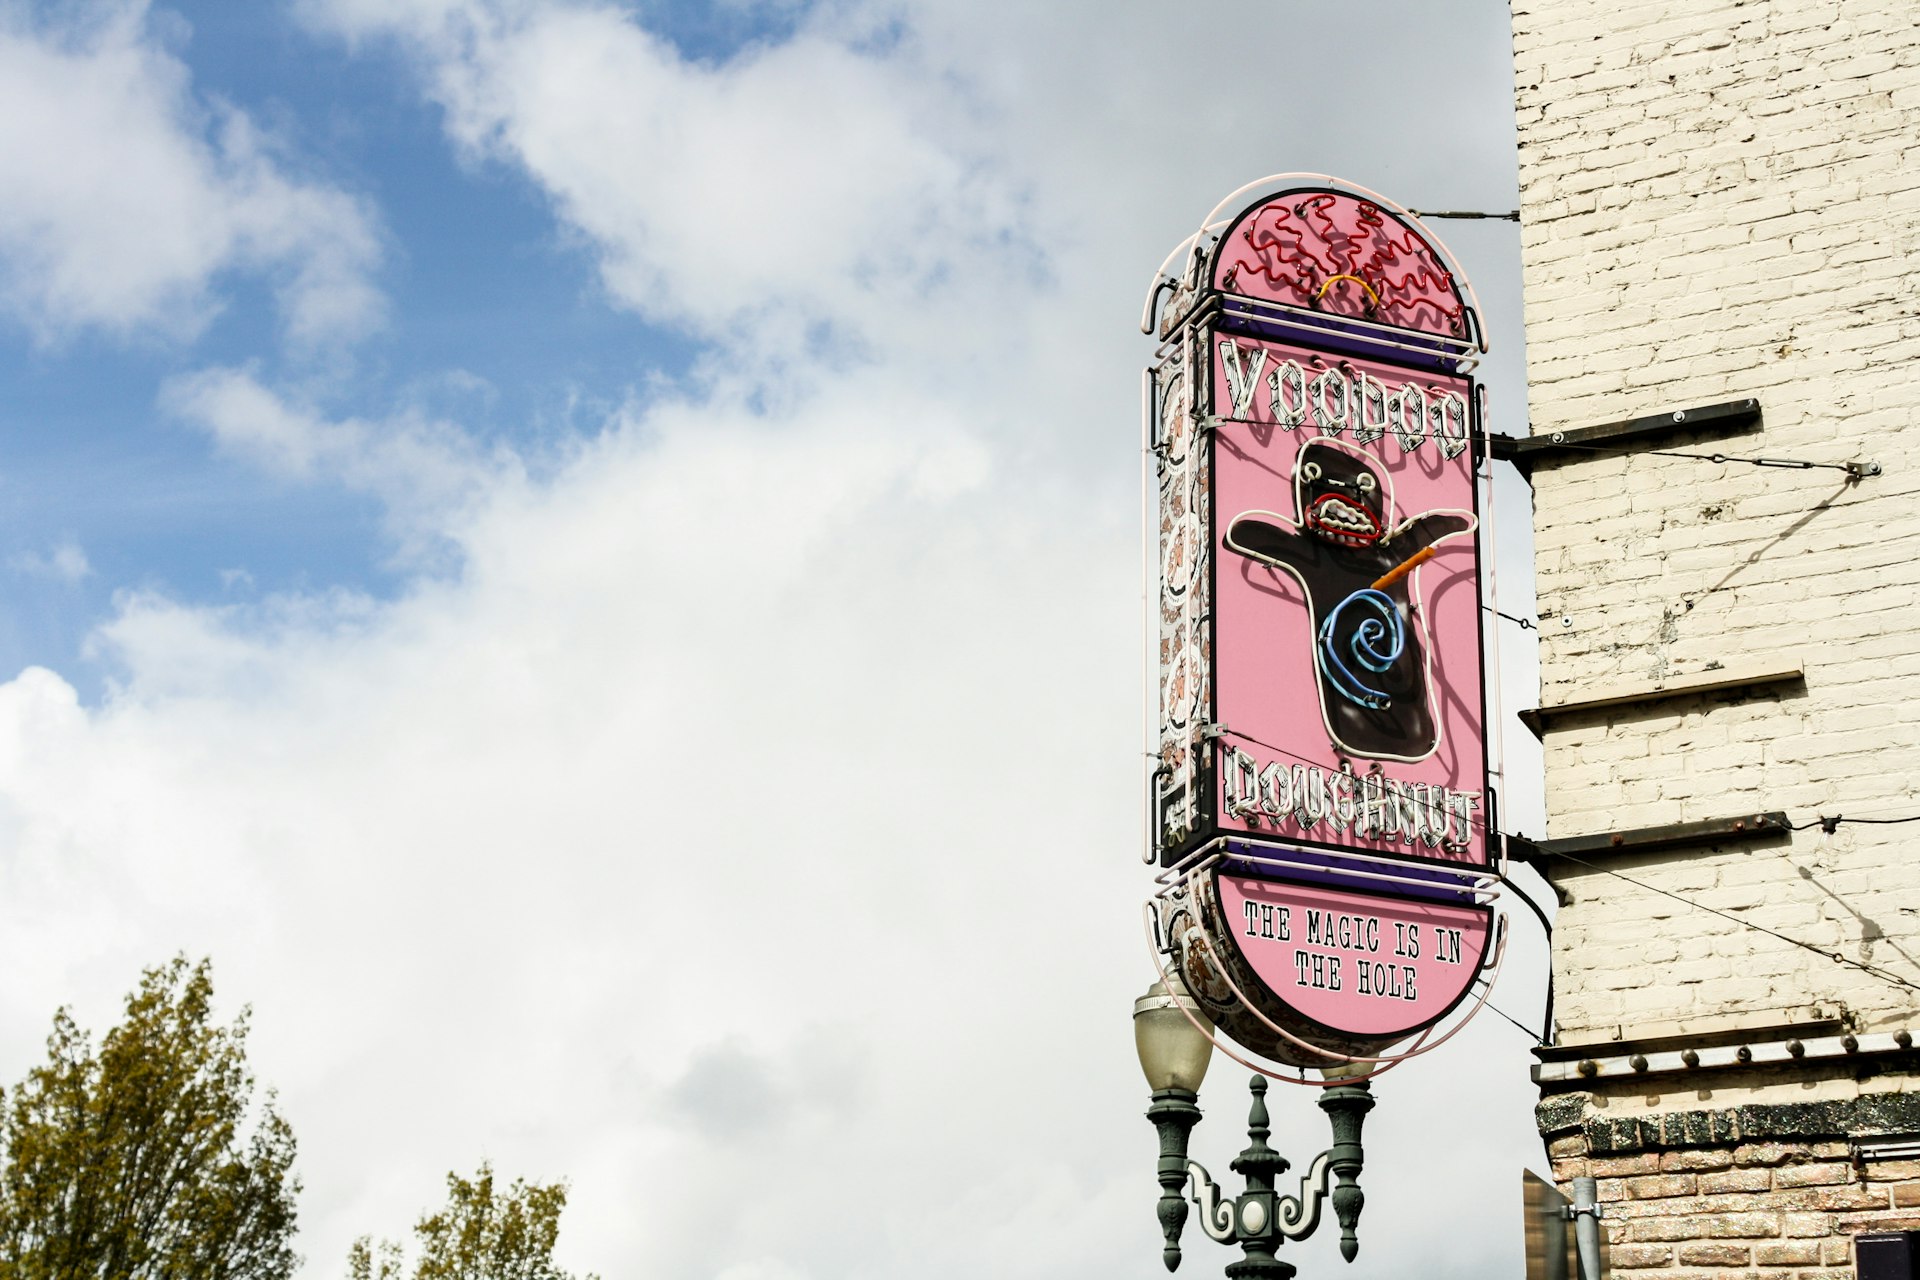 Since 2002, Voodoo Doughnut has been rolling out delicious – and sometimes strange – pastries to waiting customers. Image by Alexander Howard / Lonely Planet